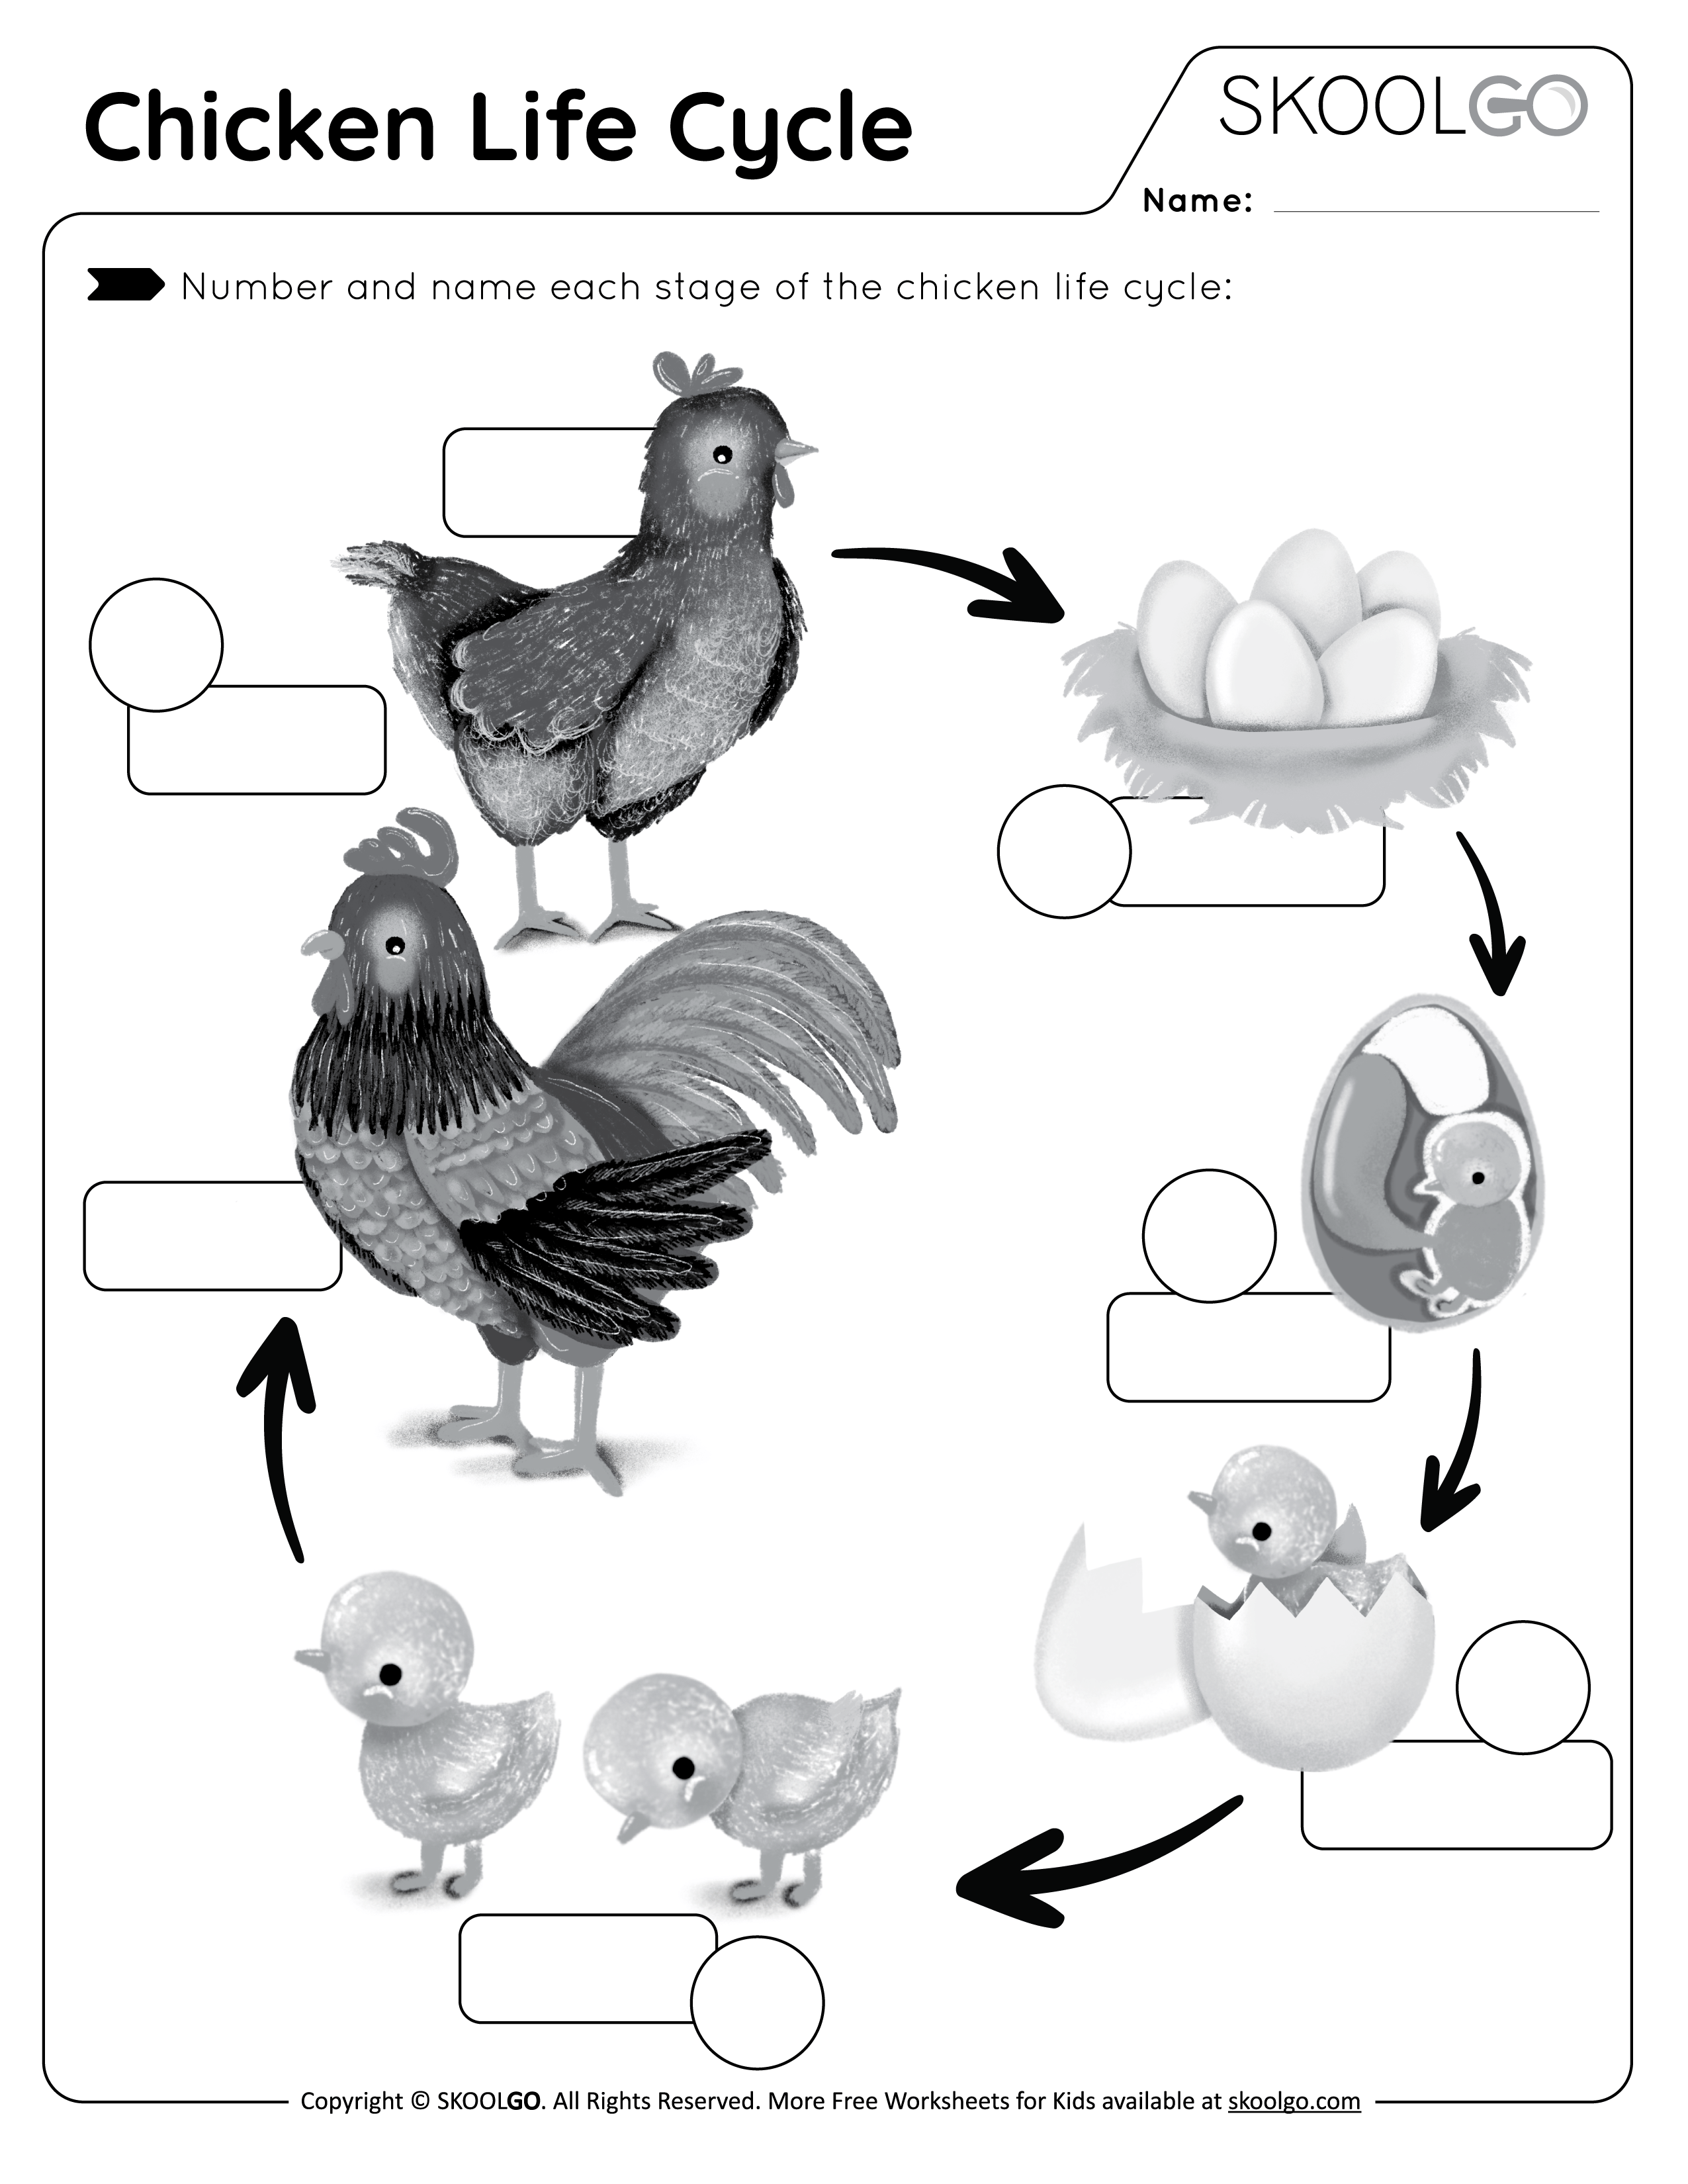 Chicken Life Cycle - Free Black and White Worksheet Activity for Kids